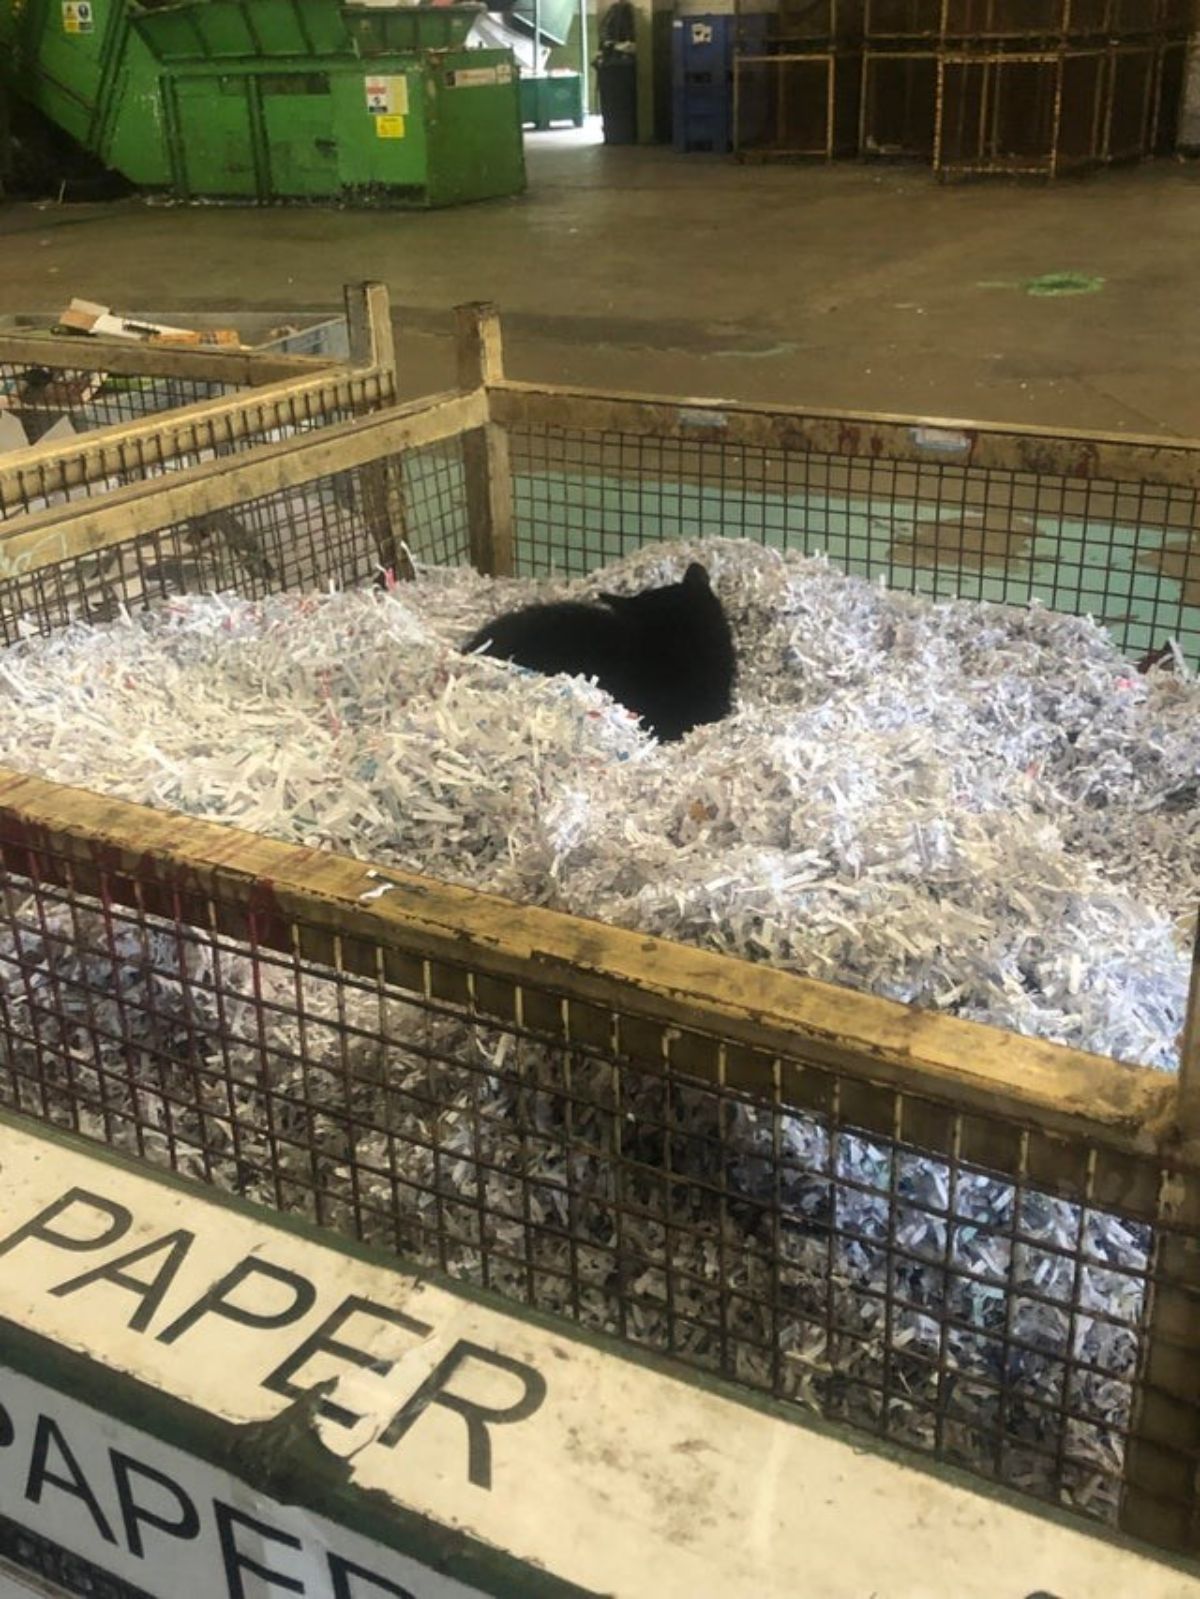 black cat sitting in a large fenced-in area filled with shredded paper